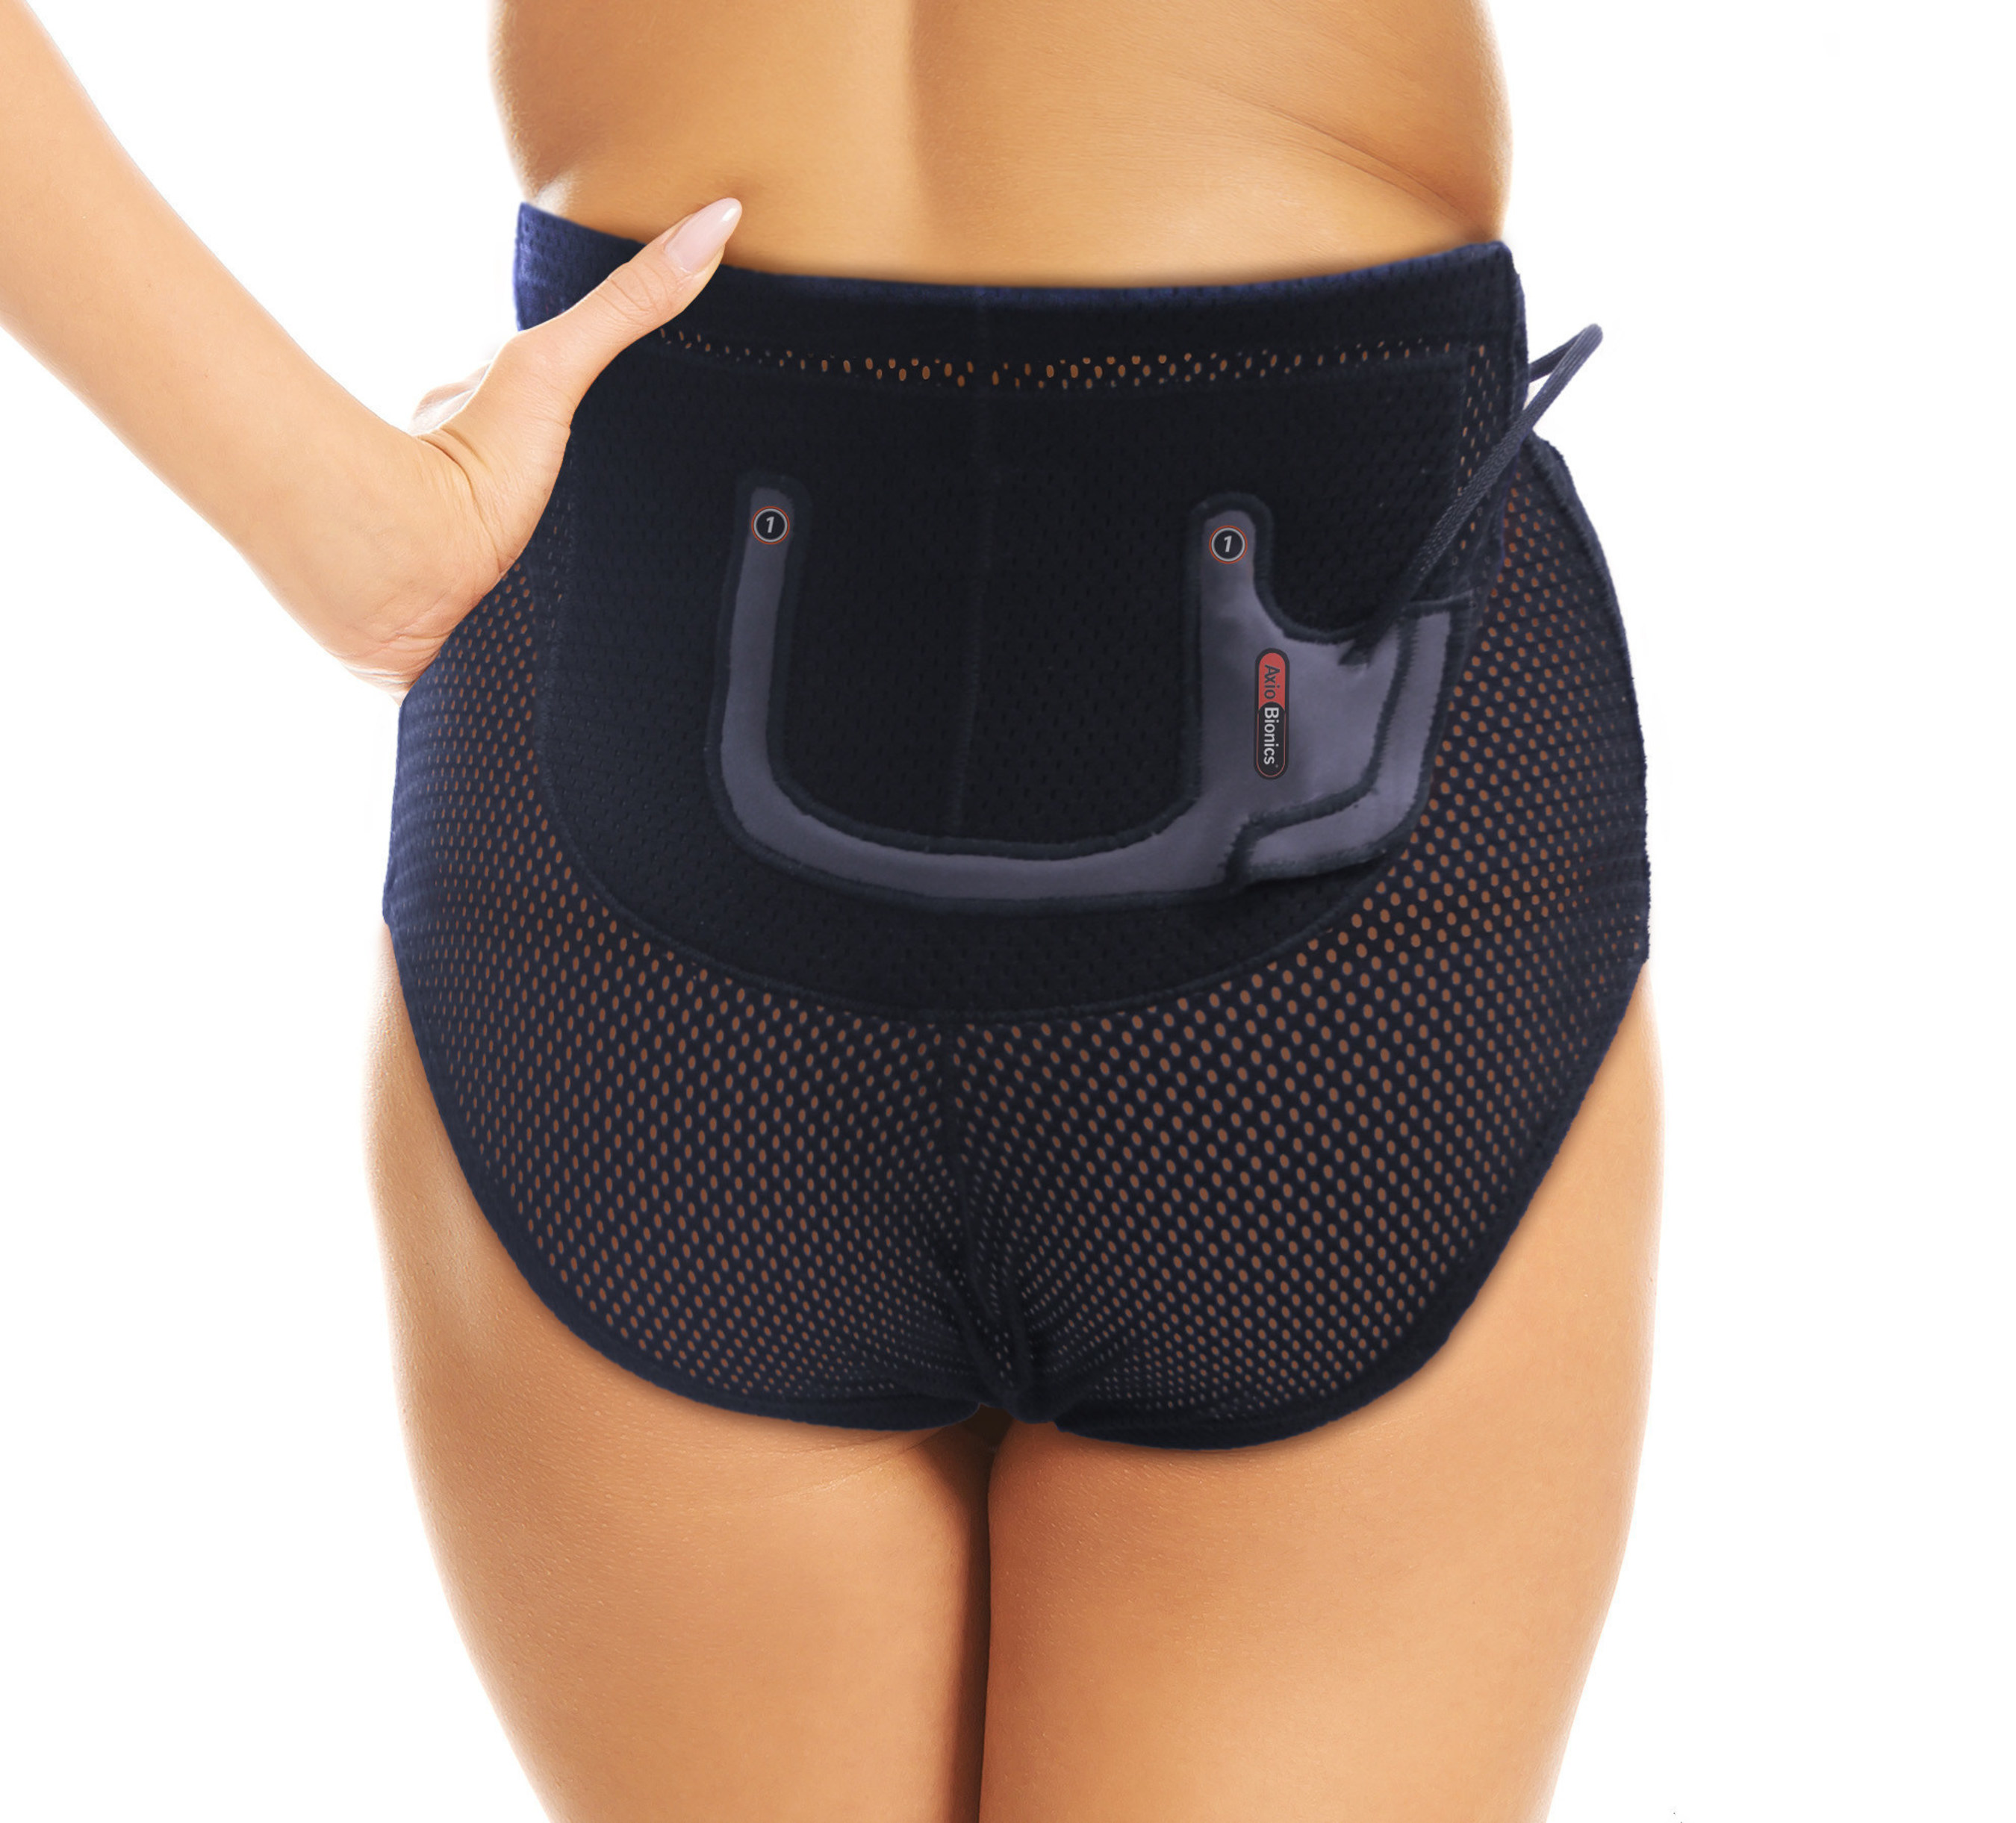 Sara was fit with the Wearable Therapy BioBrief for the lower back